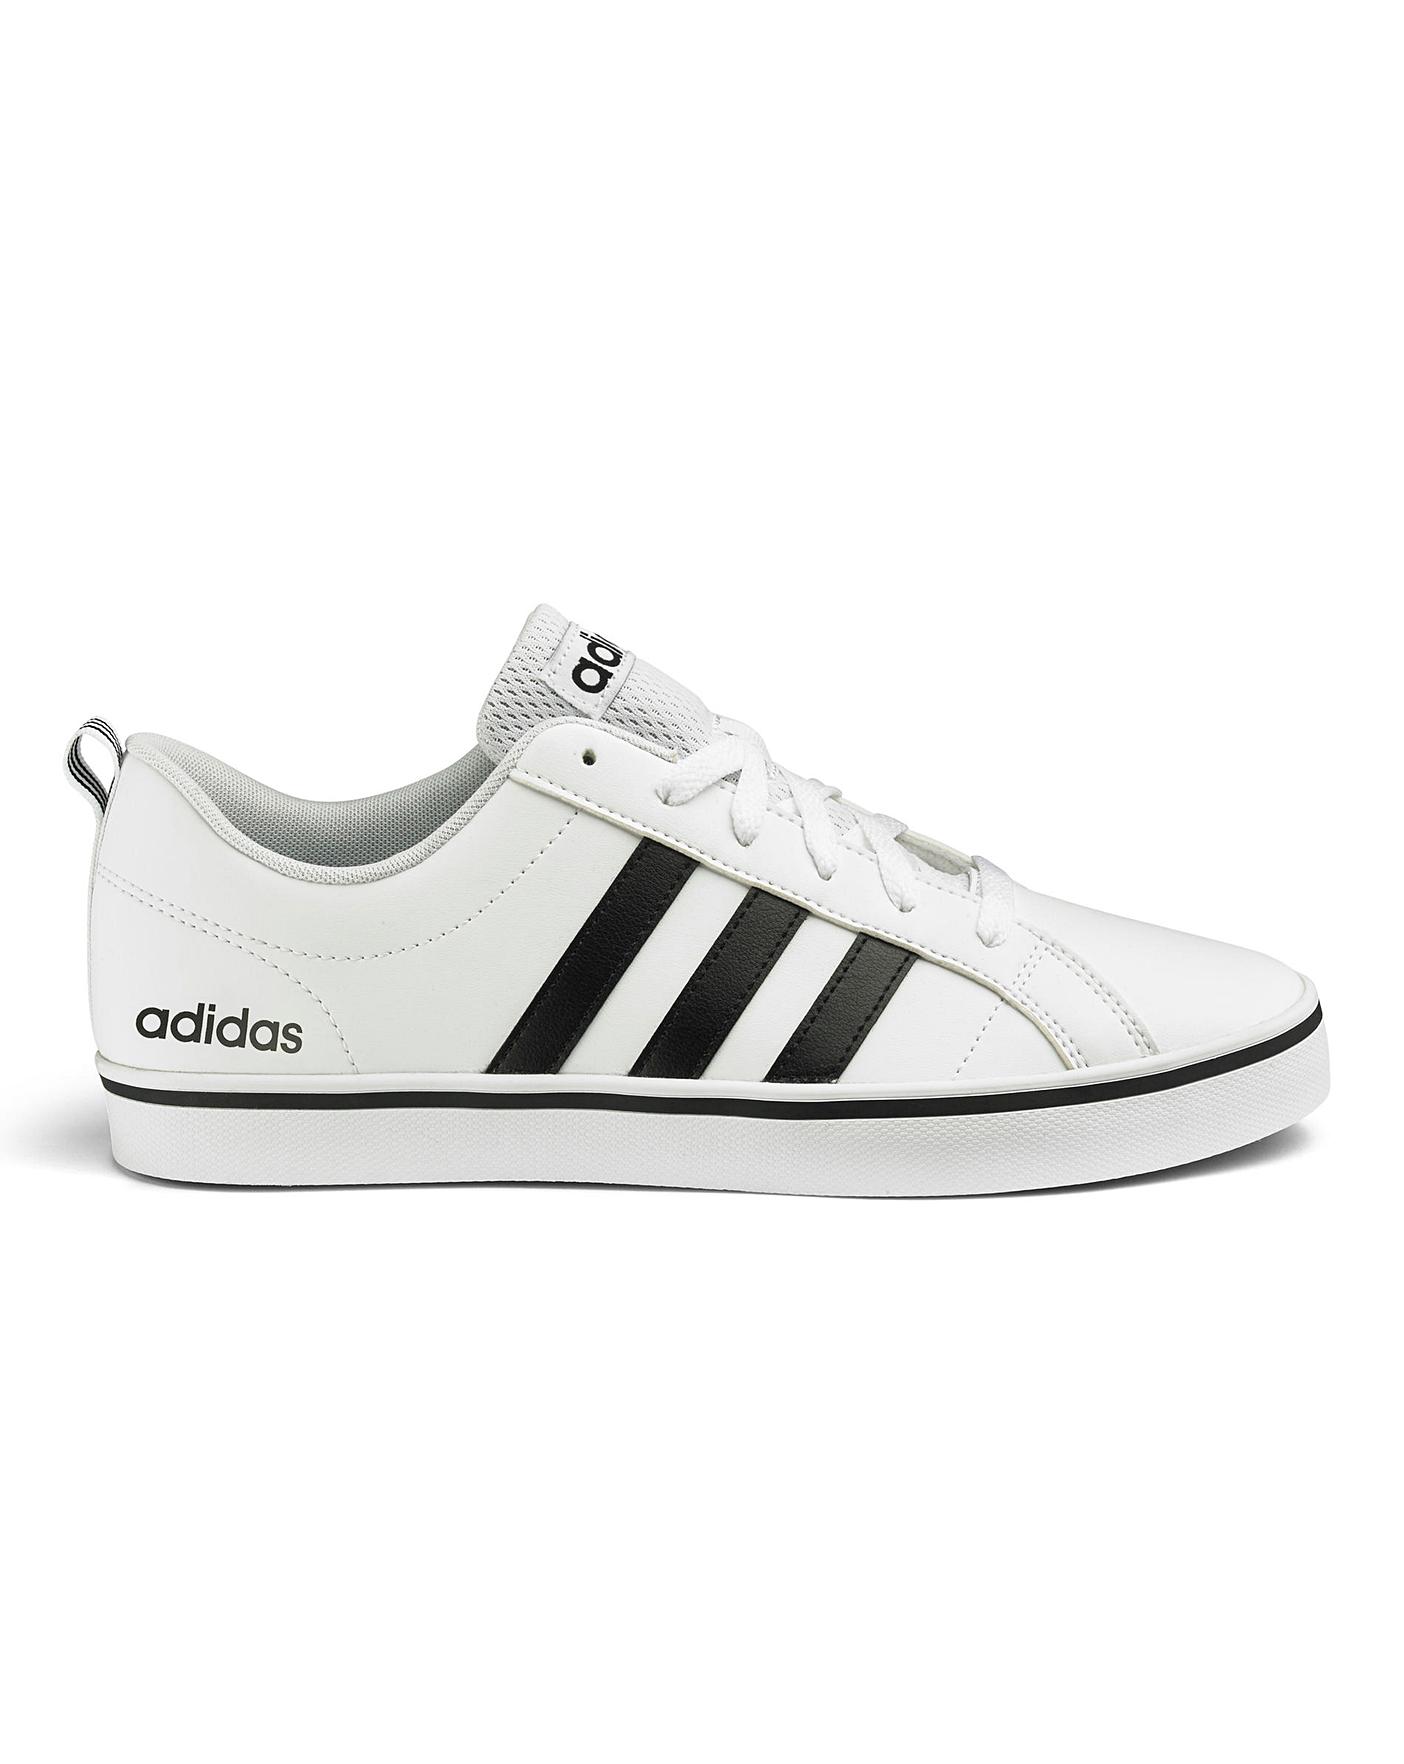 mens adidas vs pace trainers